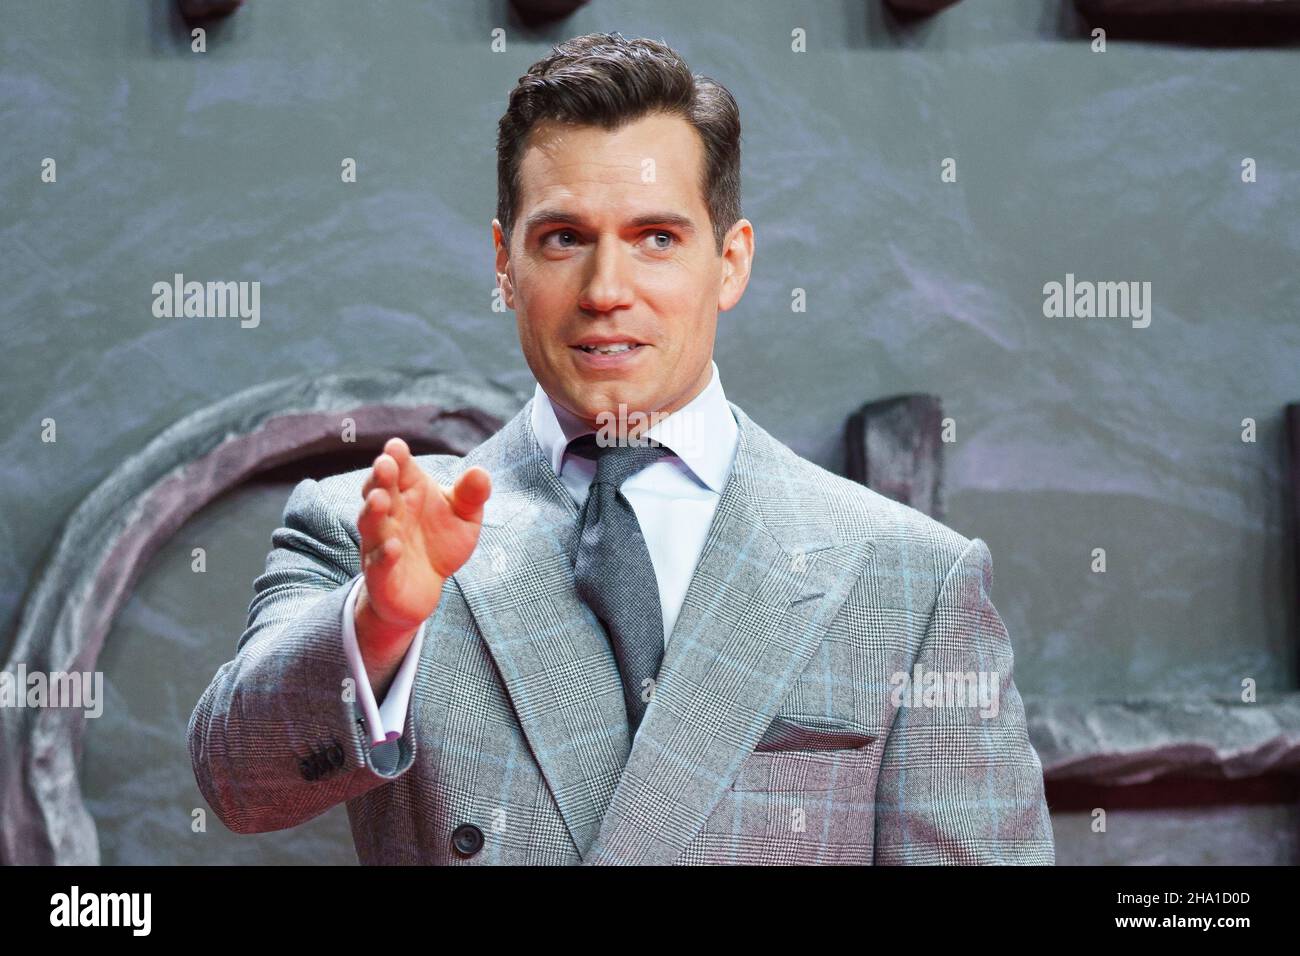 British actor Henry Cavill attends "The Witcher" season 2 premiere at Kinepolis Cinema in Madrid, Spain. (Photo by Atilano Garcia / SOPA Images/Sipa USA) Stock Photo